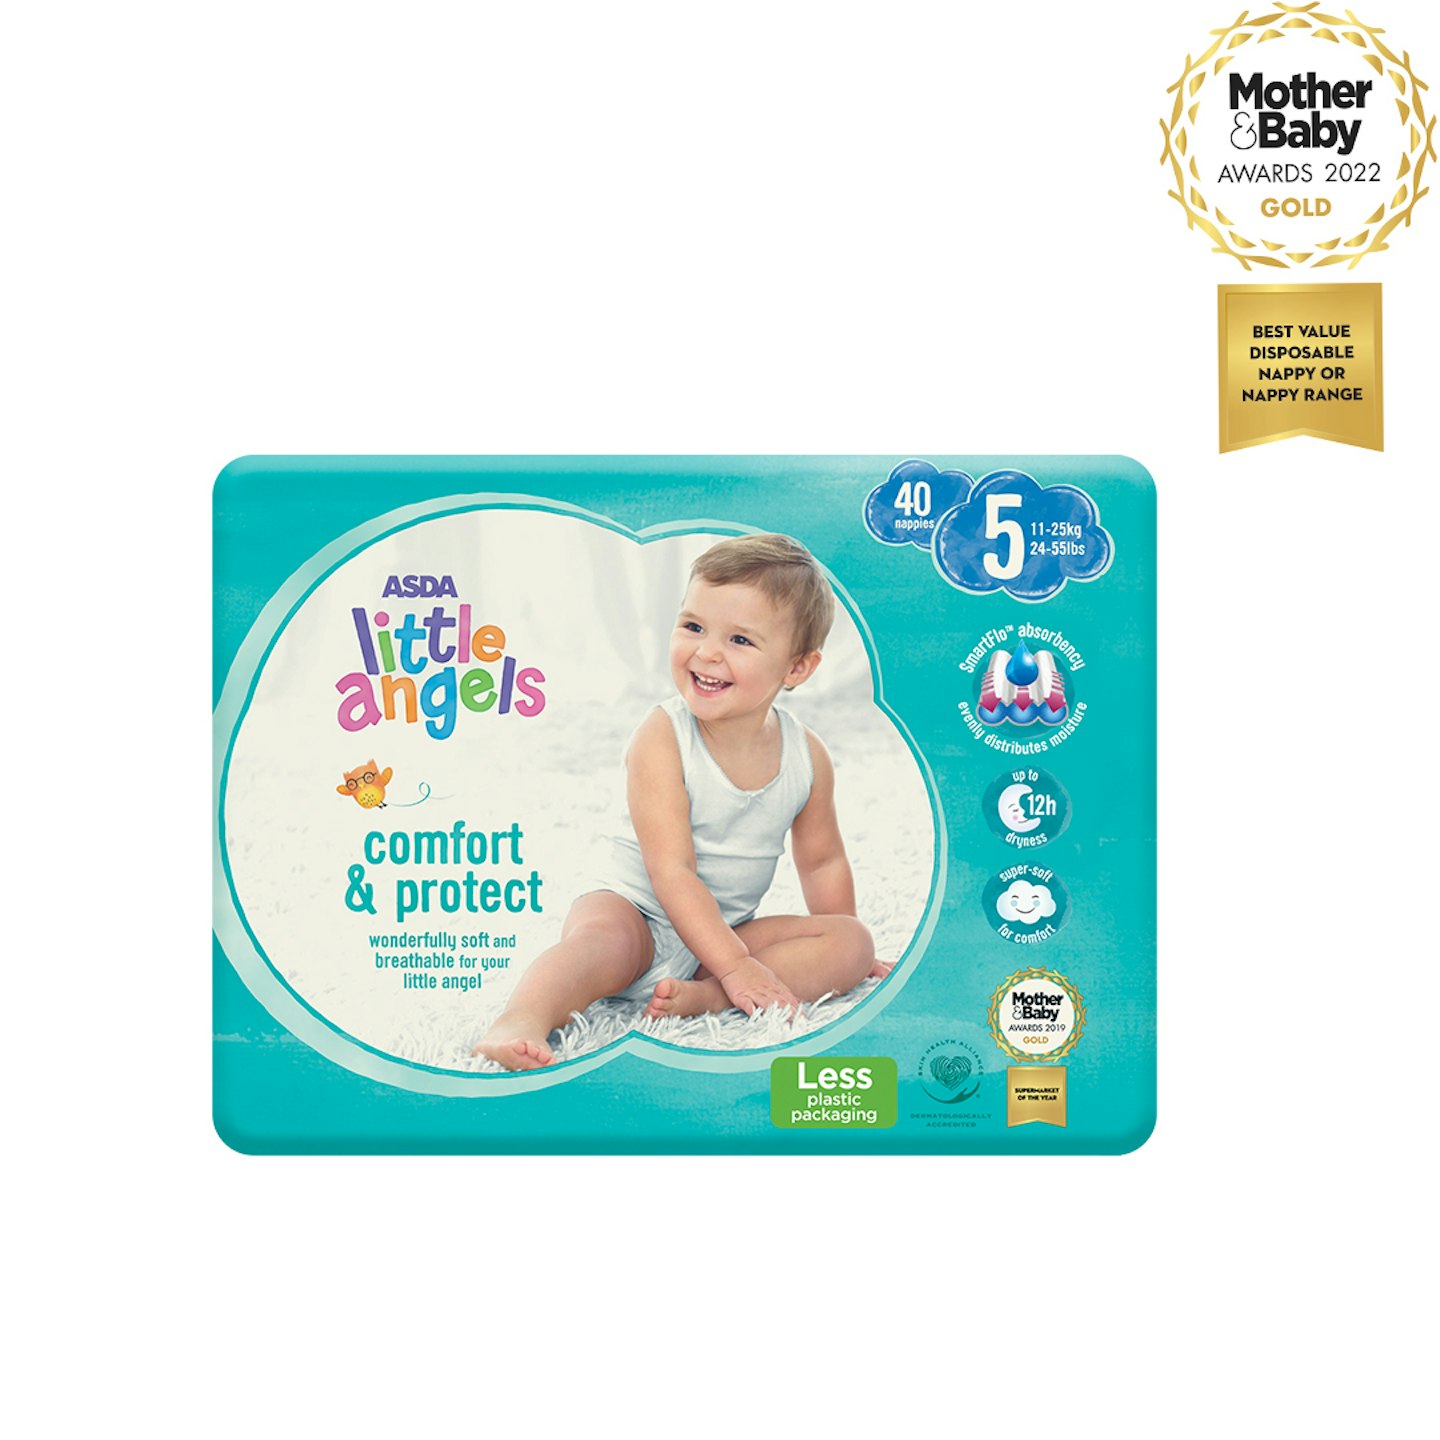 ASDA Little Angels Comfort & Protect Nappies